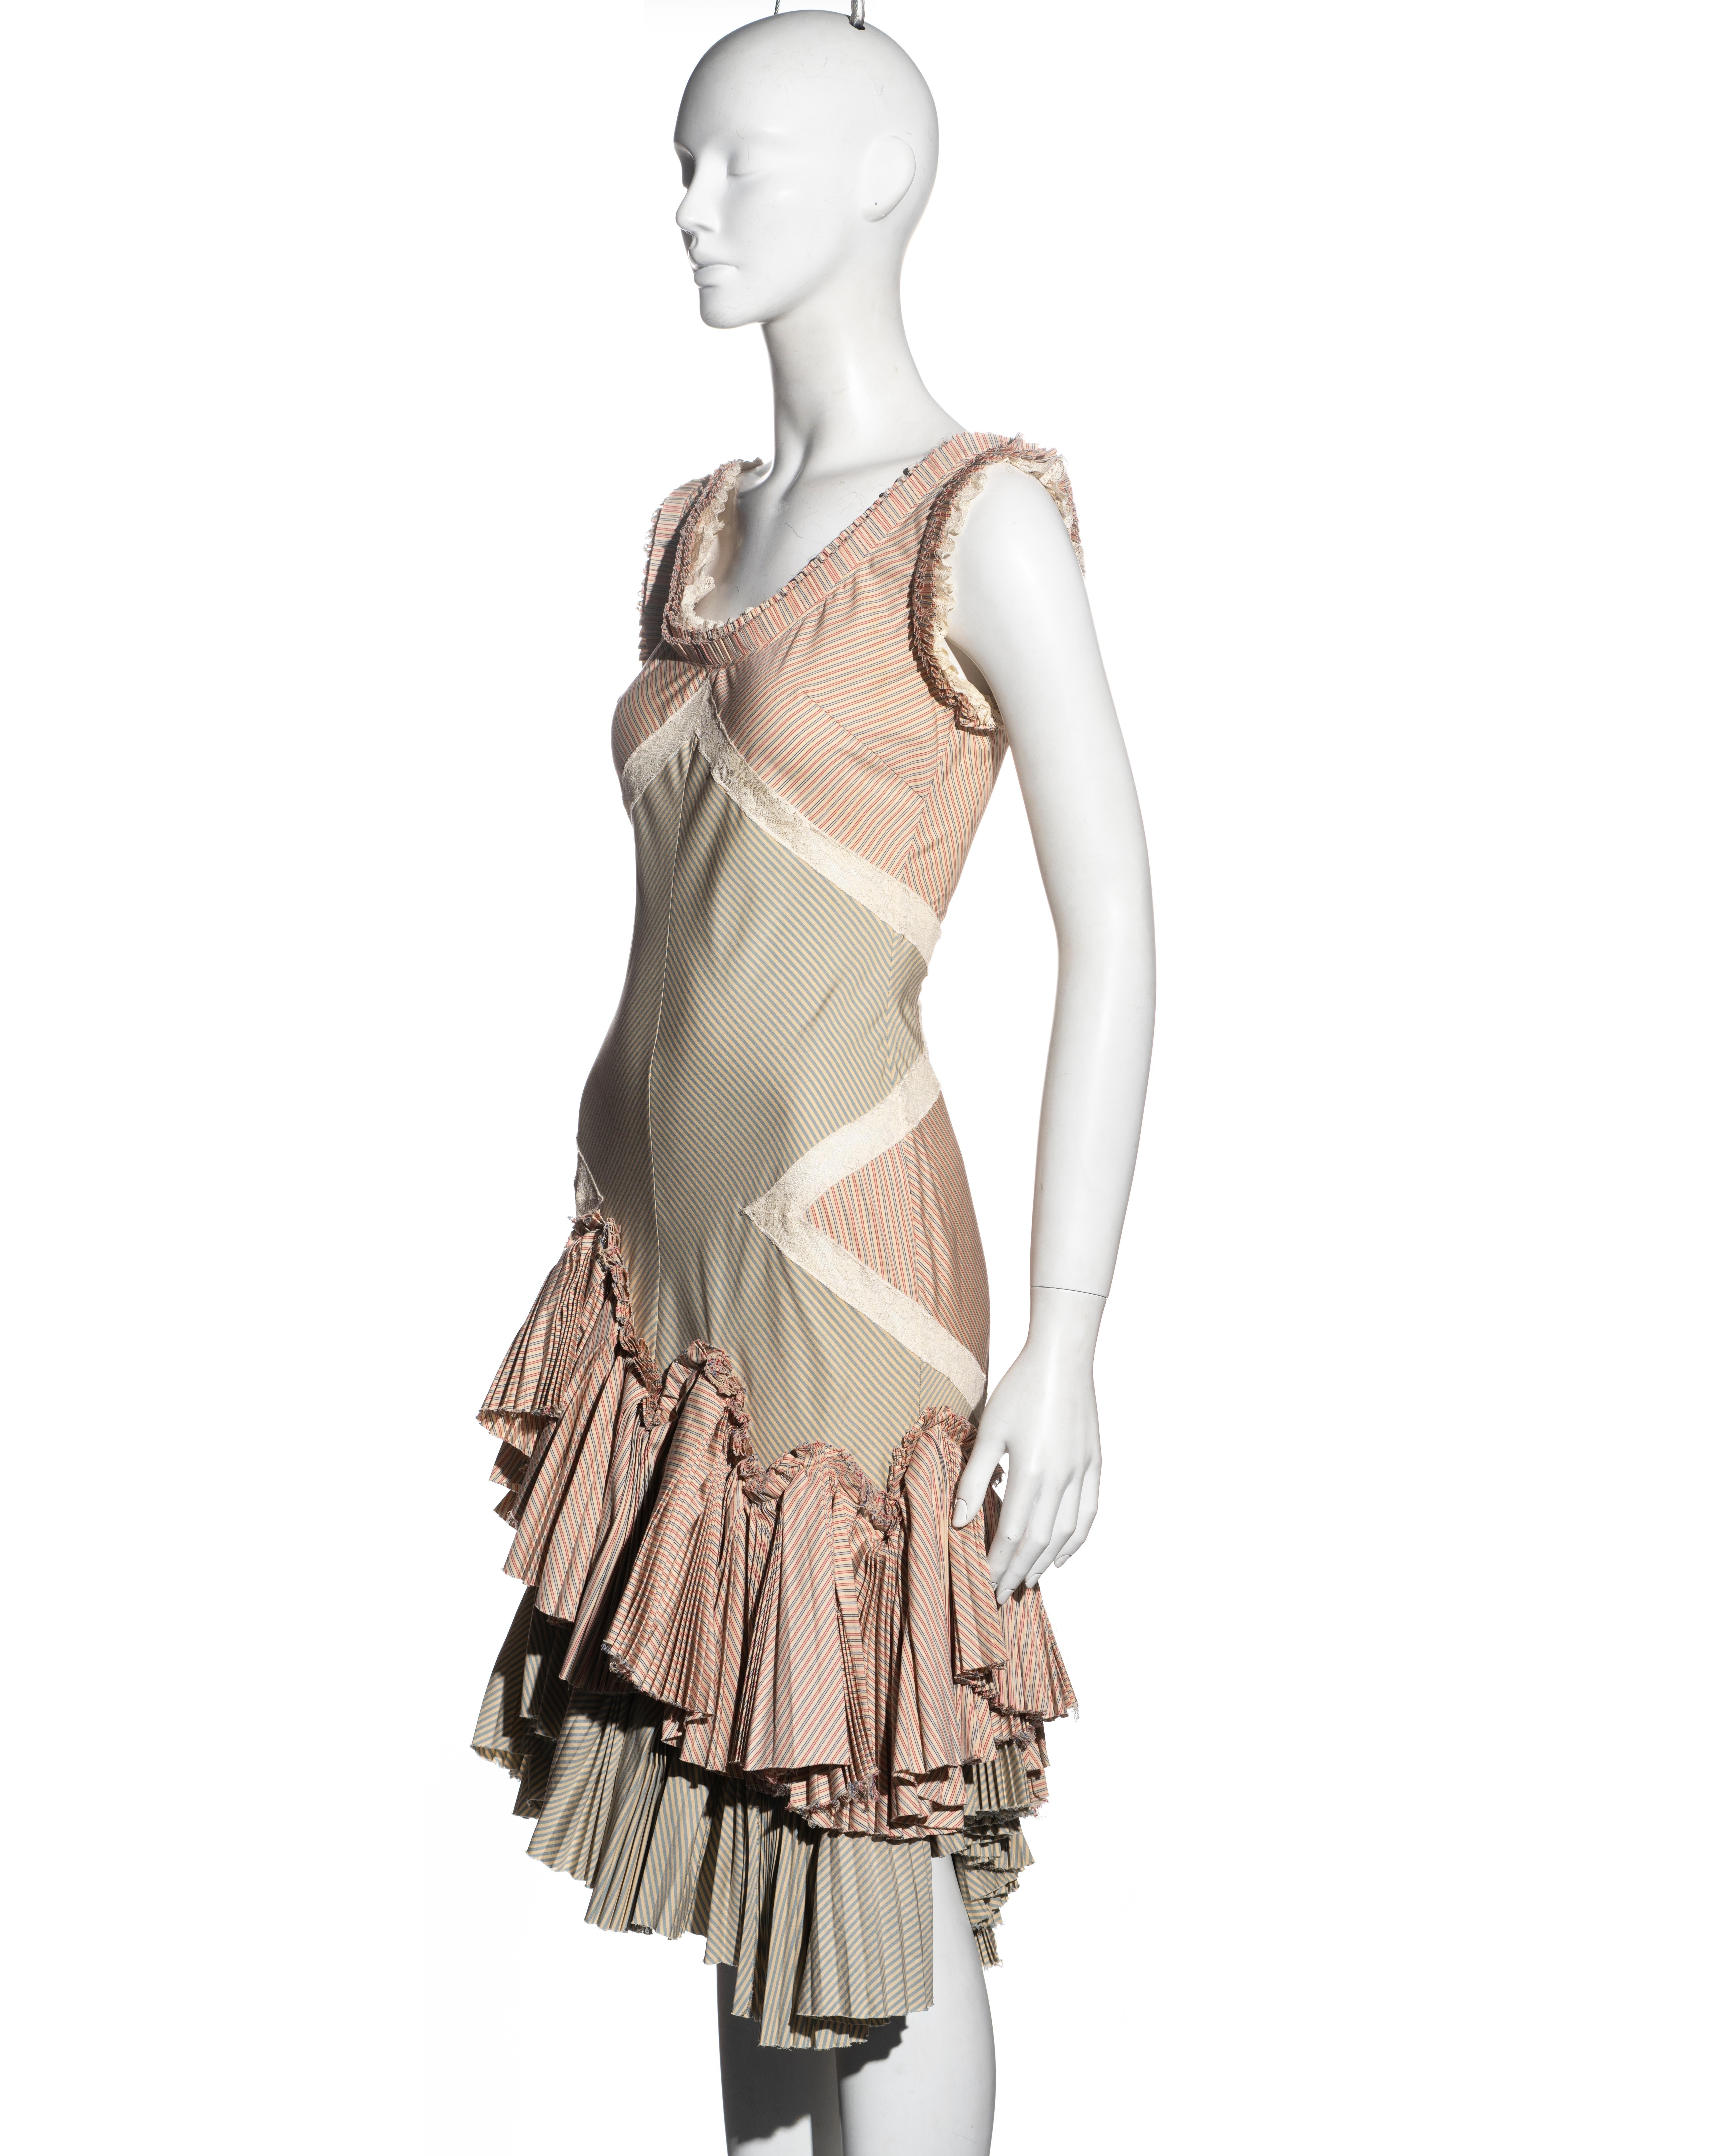 Alexander McQueen striped cotton and lace dress with pleated skirt, ss 2005 For Sale 1